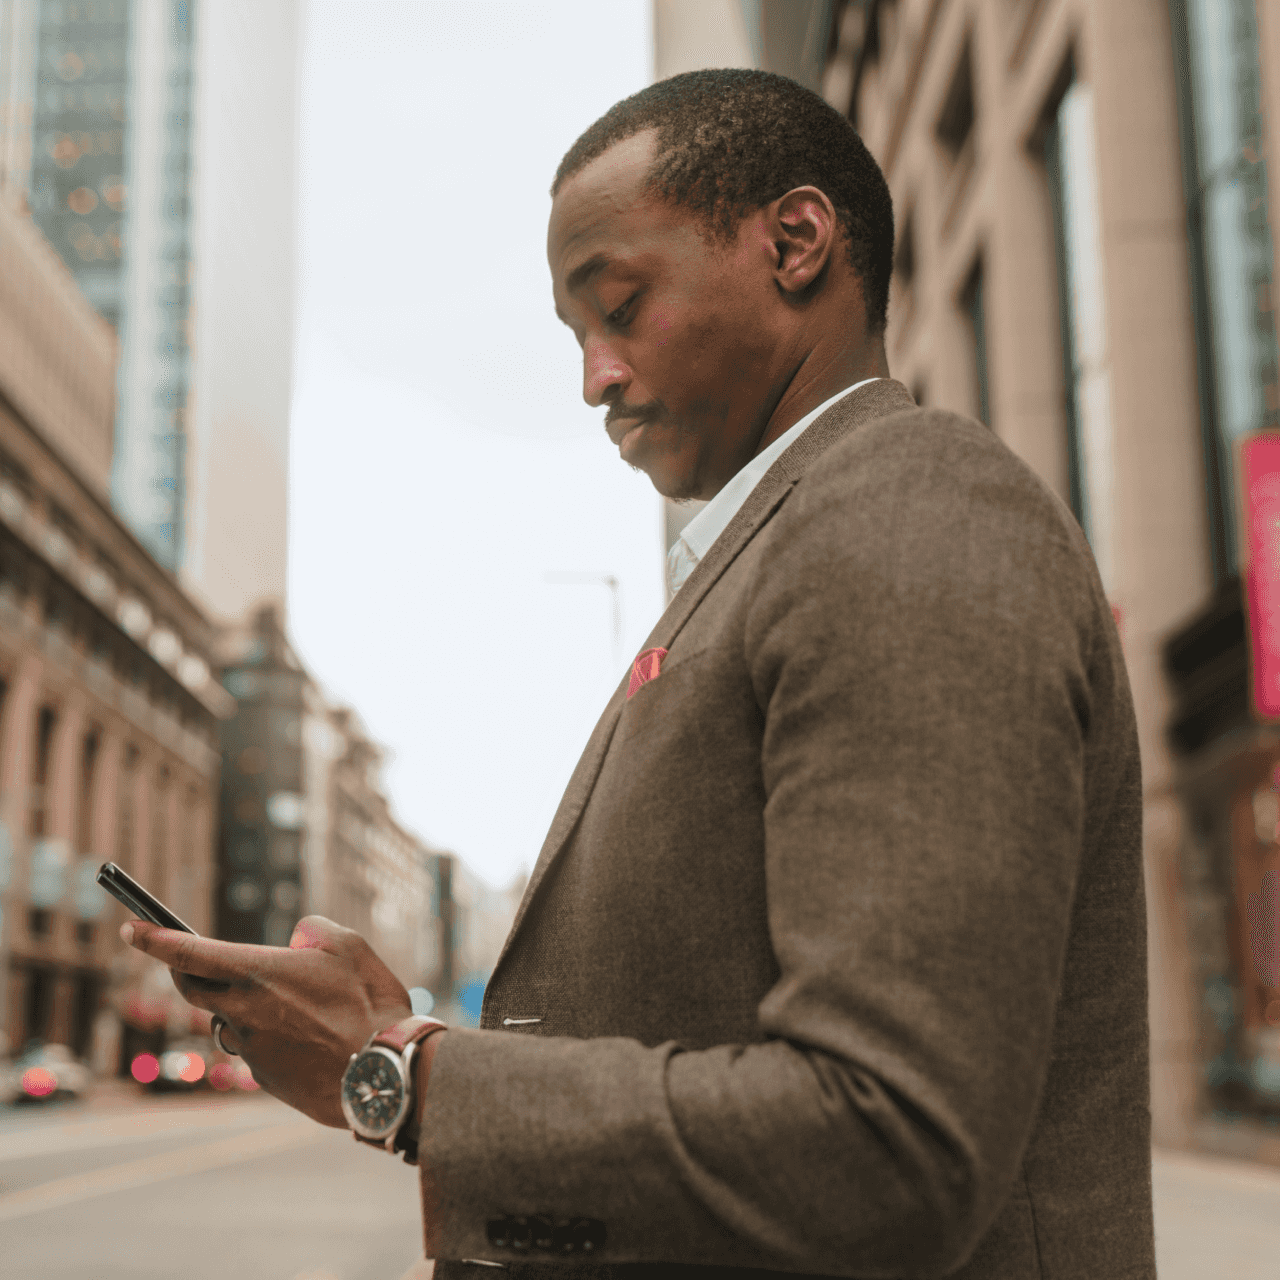 Image of man in a suit on city street looking at smart phone.